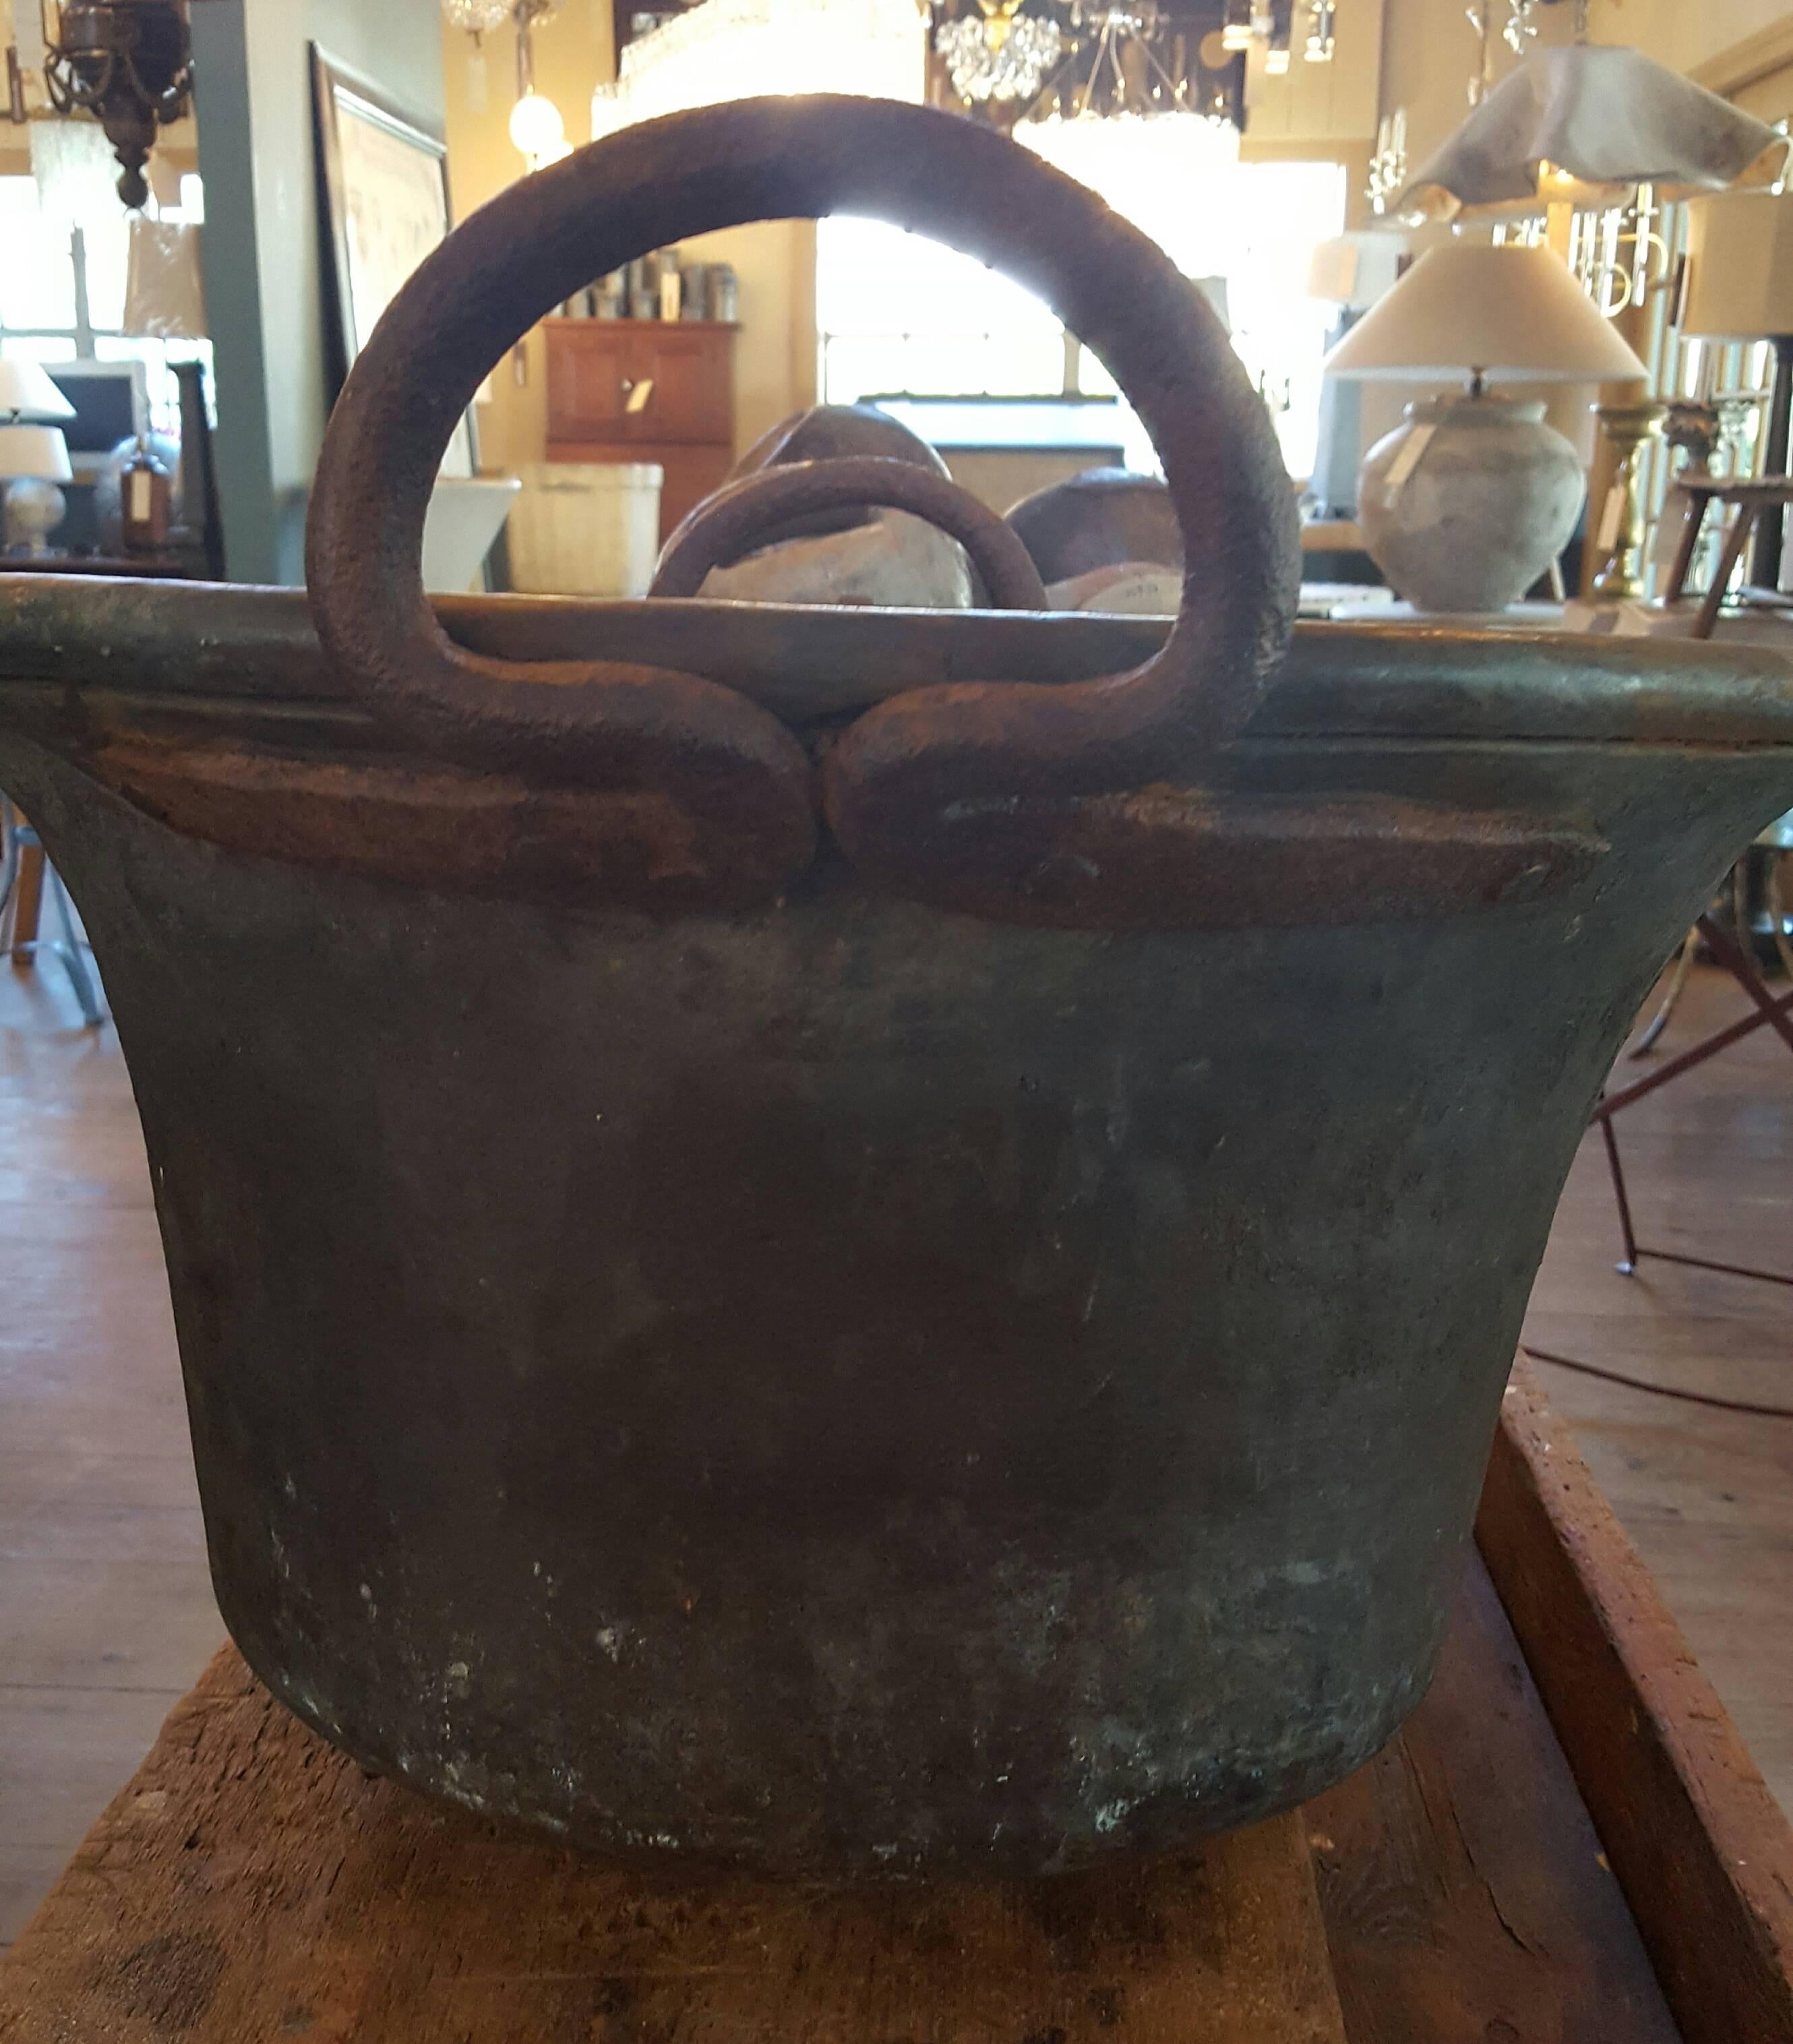 Hand-Crafted Copper Buckets with Iron Handles from France, circa 1890